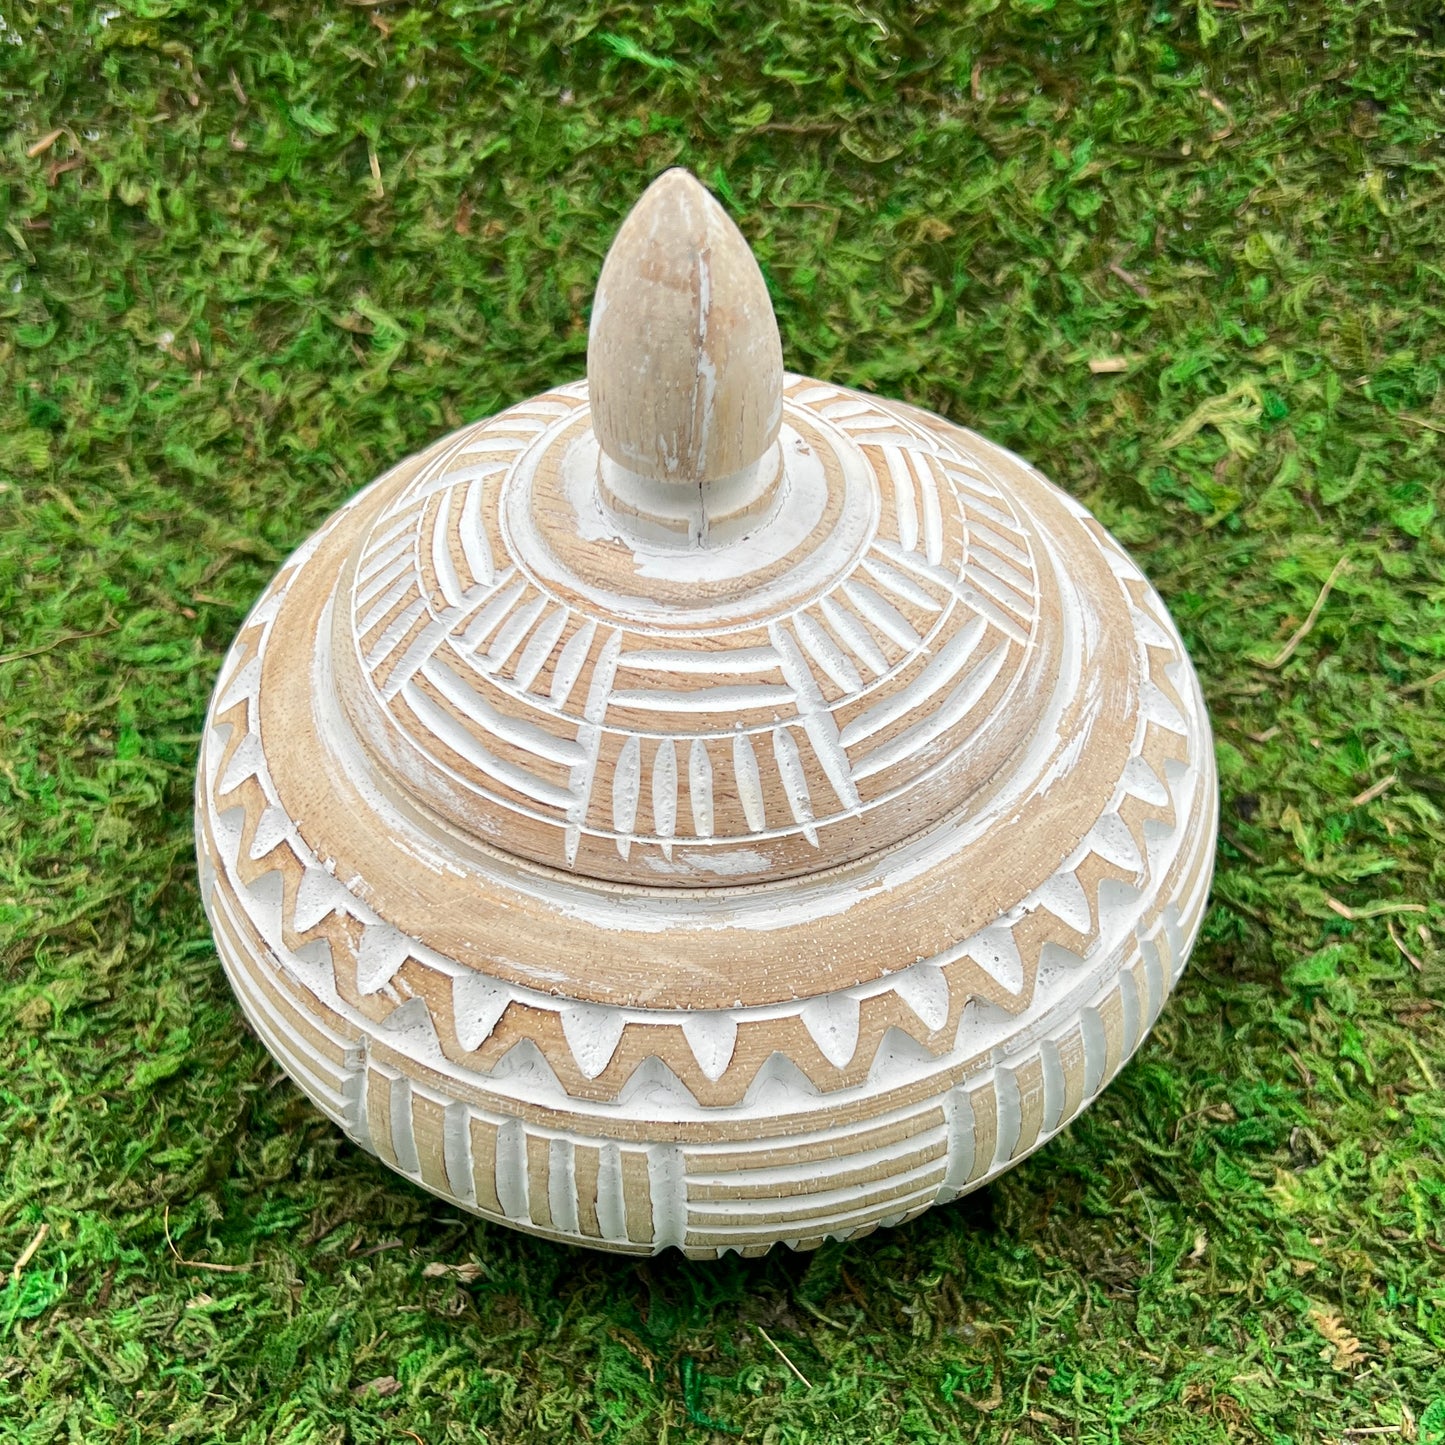 Carved Decor Pointed Bowl